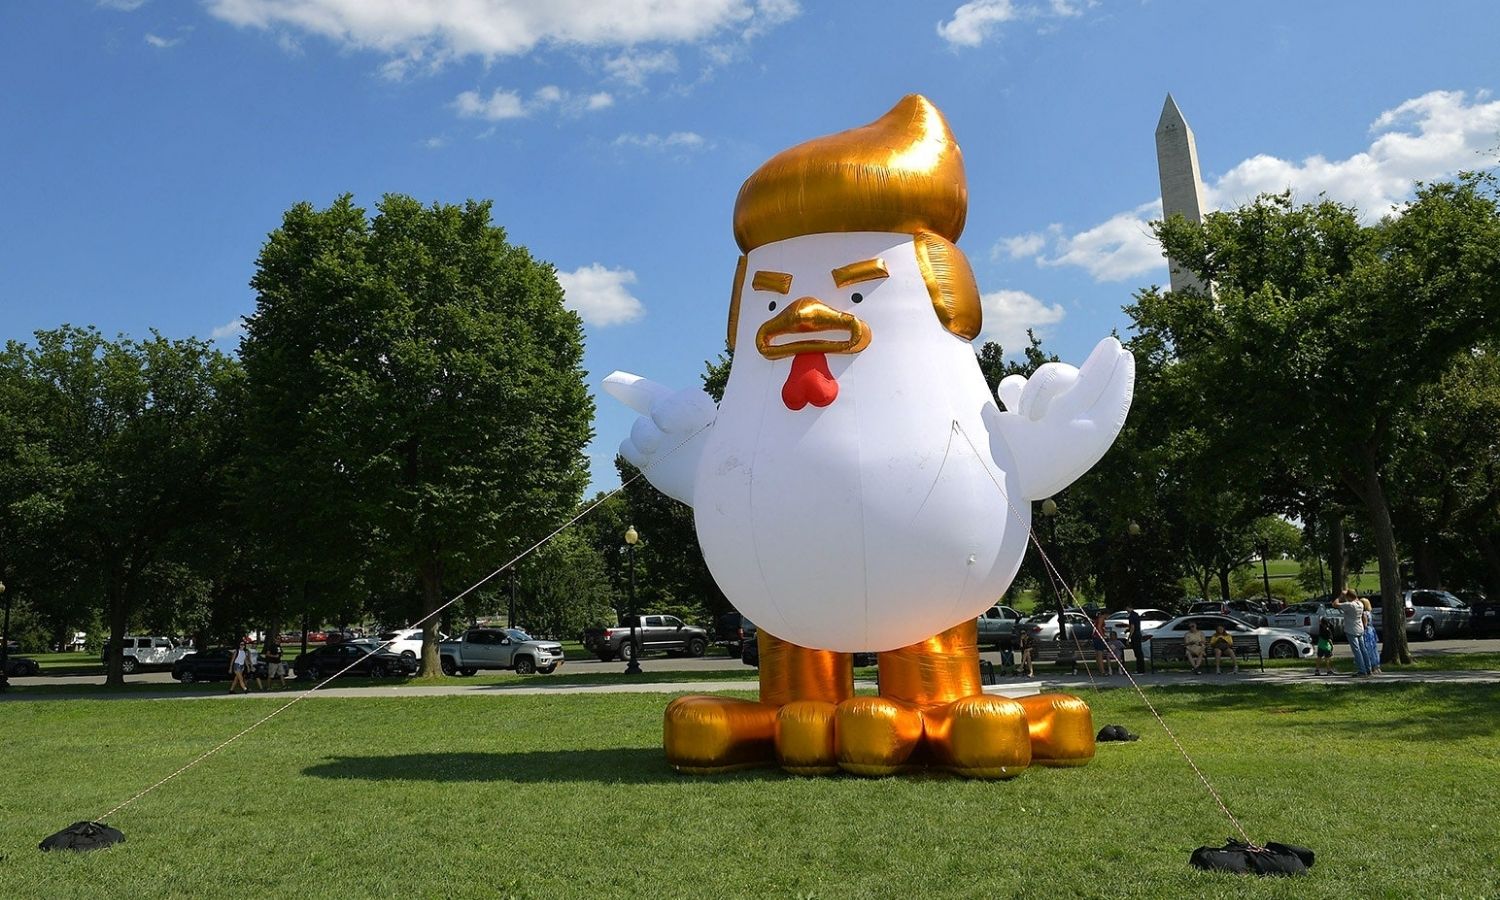 OTD in 2017: An inflatable chicken that resembled US President Donald Trump was placed outside the US White House as part of a political protest.